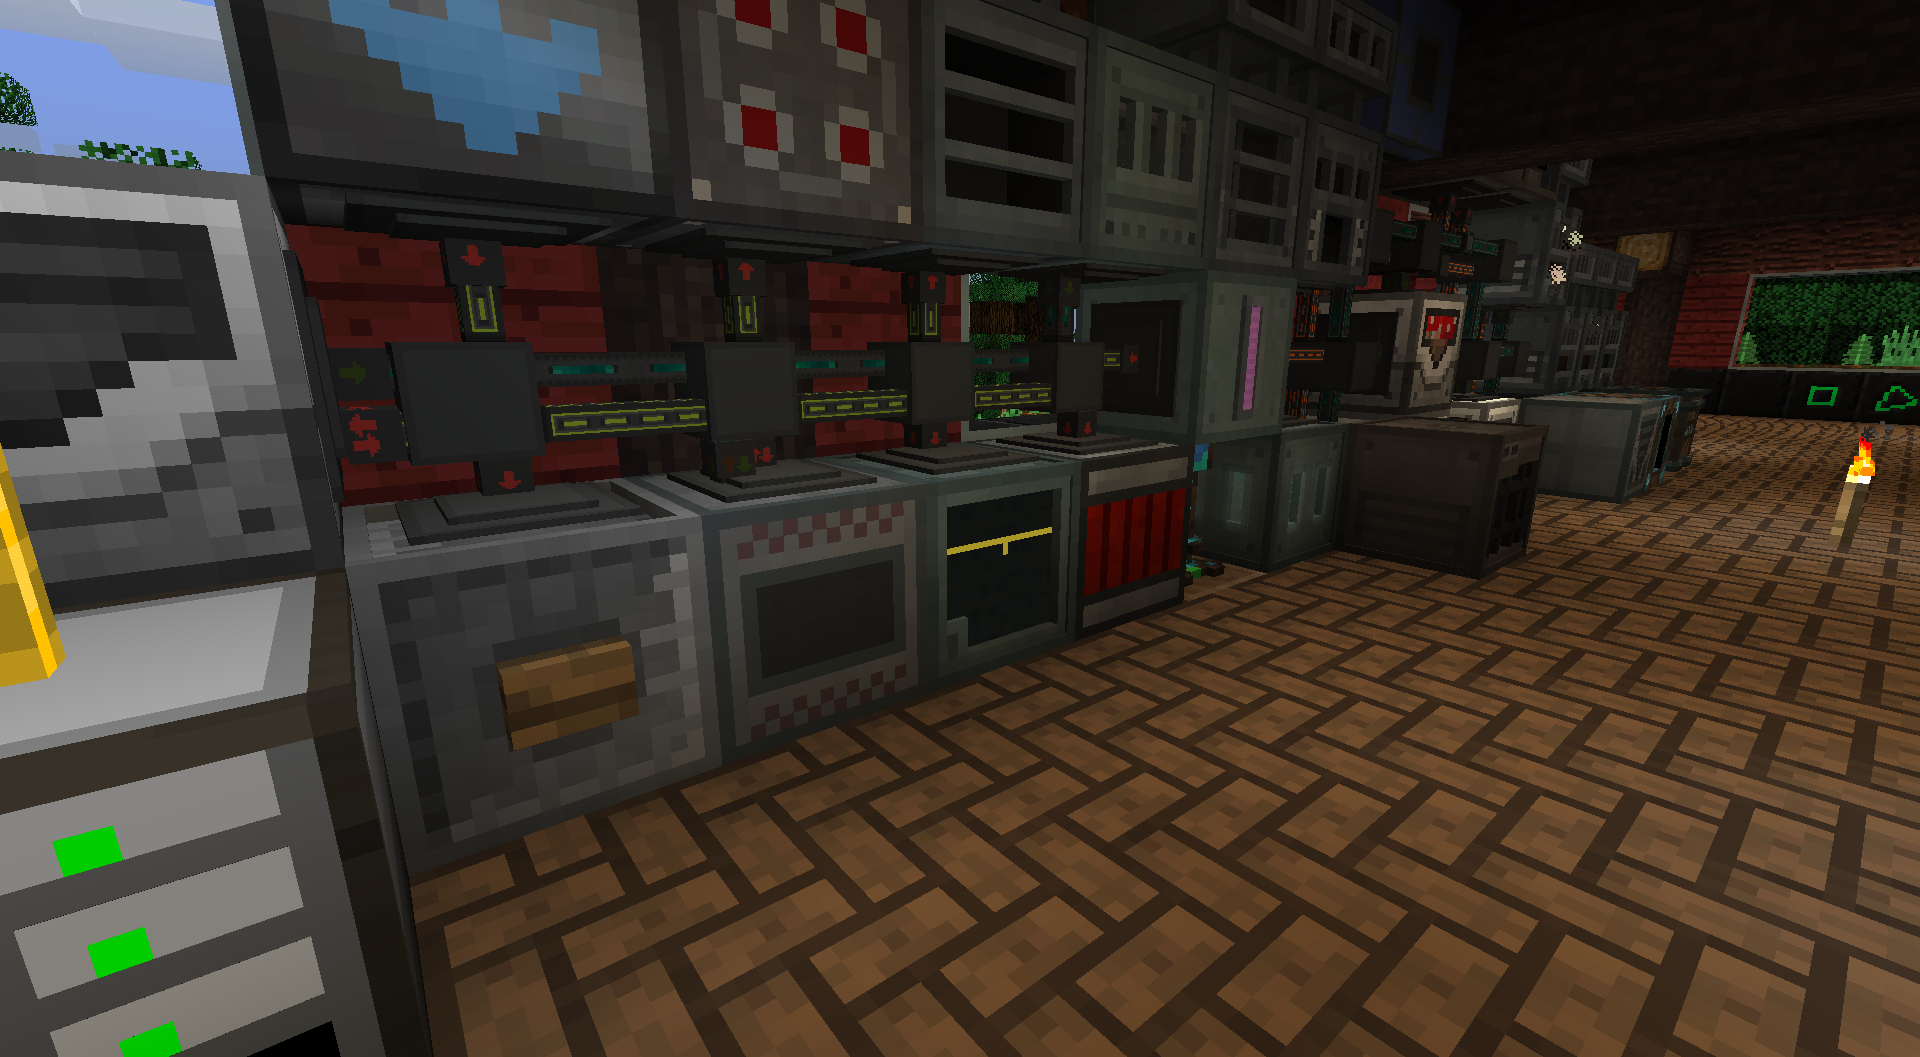 minecraft: A room full of various machinery